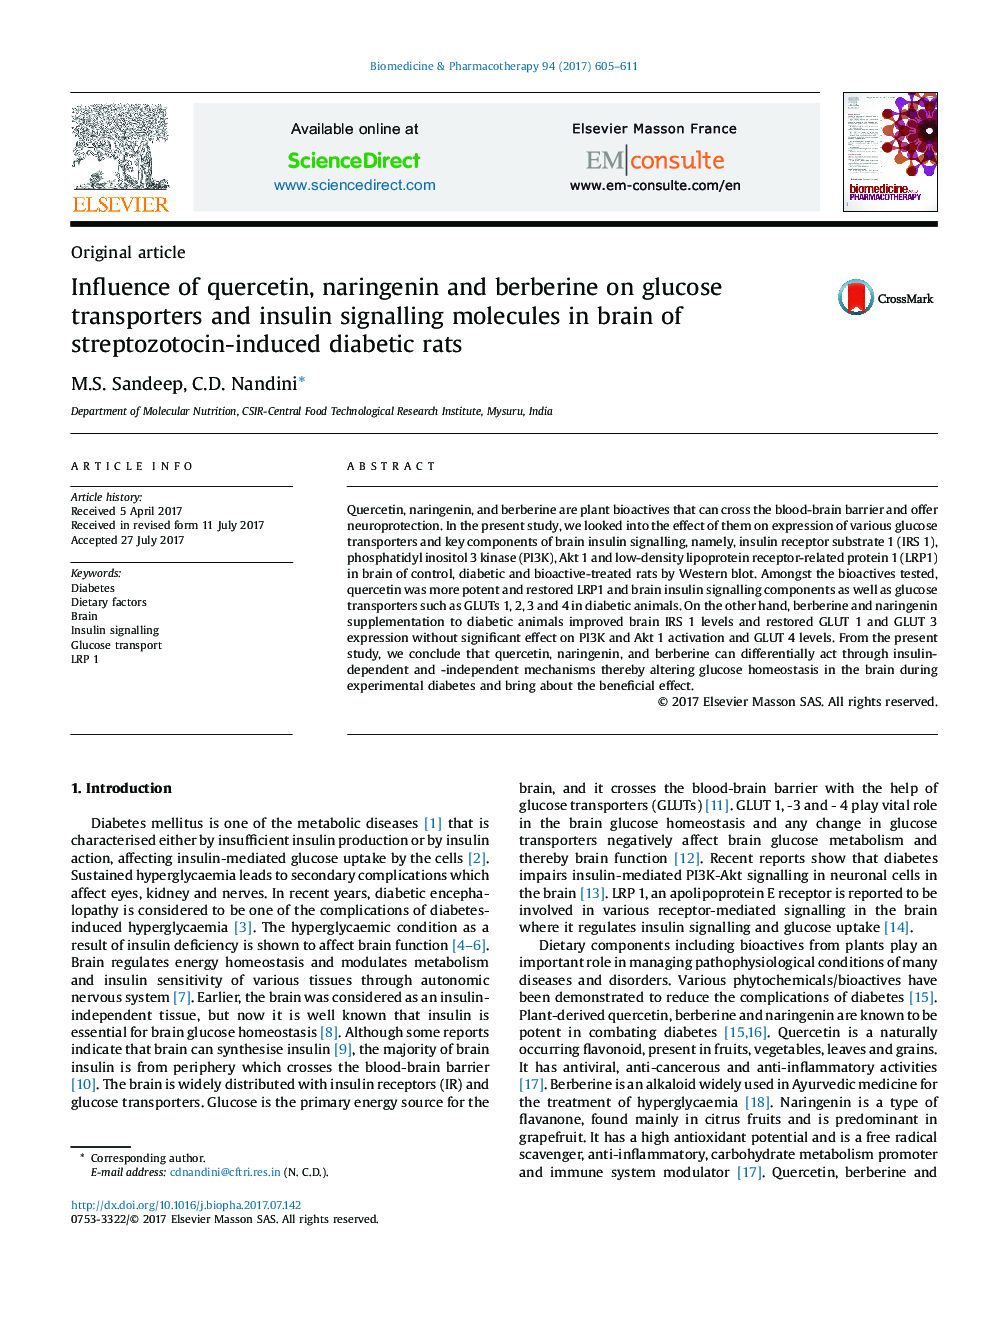 Influence of quercetin, naringenin and berberine on glucose transporters and insulin signalling molecules in brain of streptozotocin-induced diabetic rats